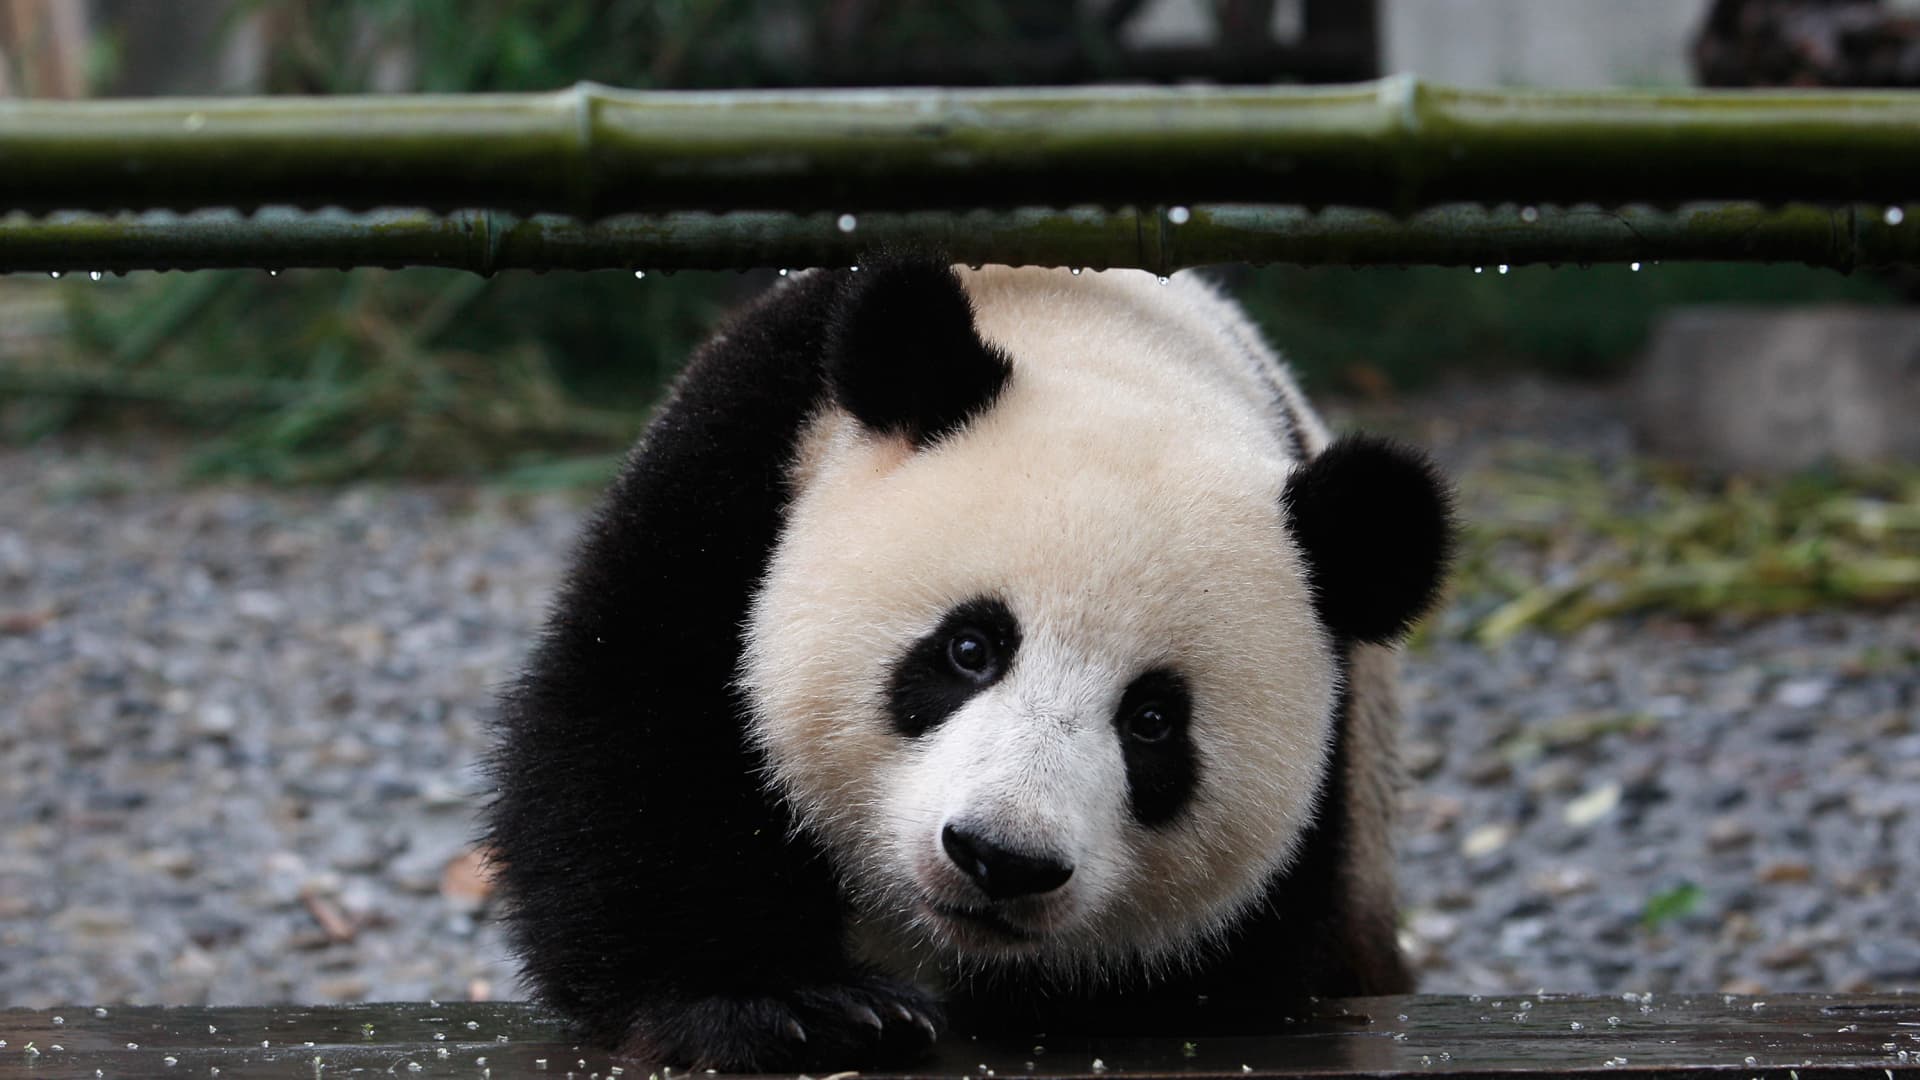 Forget global financial leaders, Chengdu's real stars are its pandas